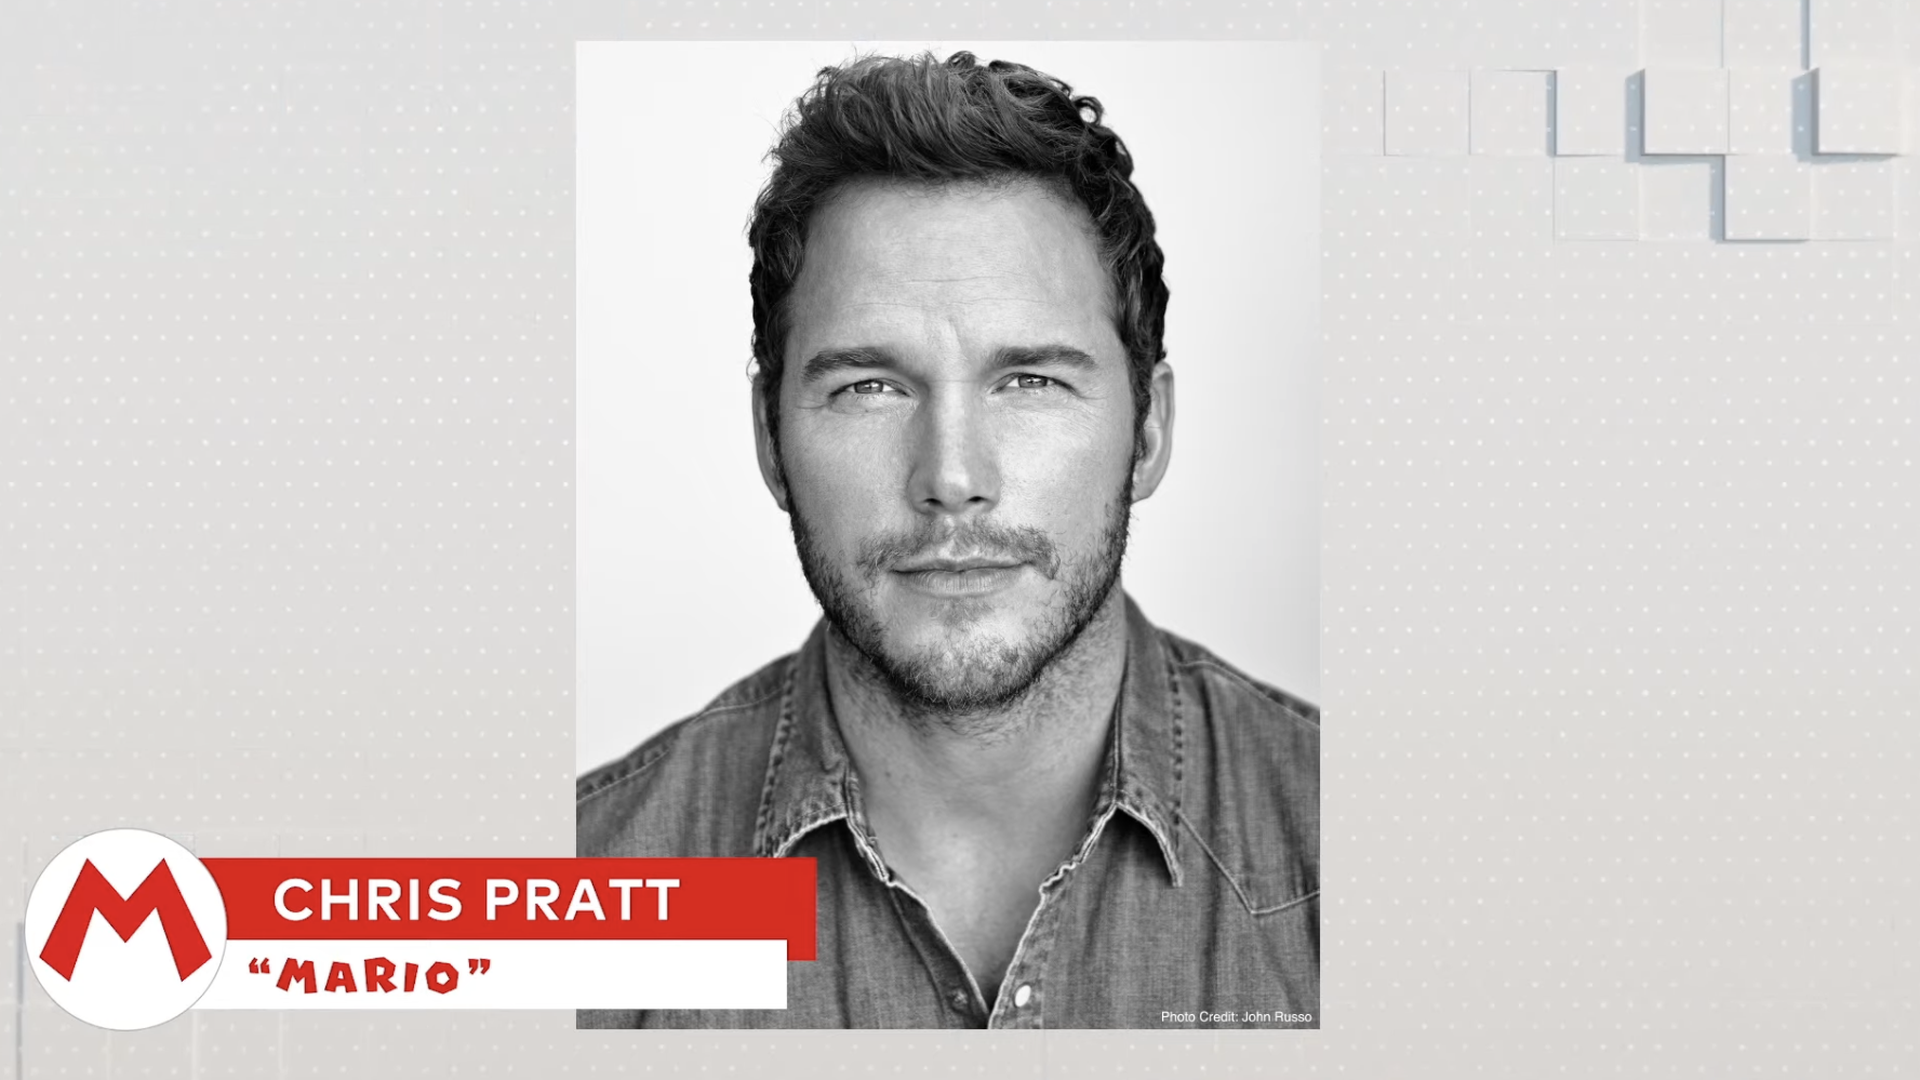 Photo of actor Chris Pratt with a label indicating he'll be playing Super Mario